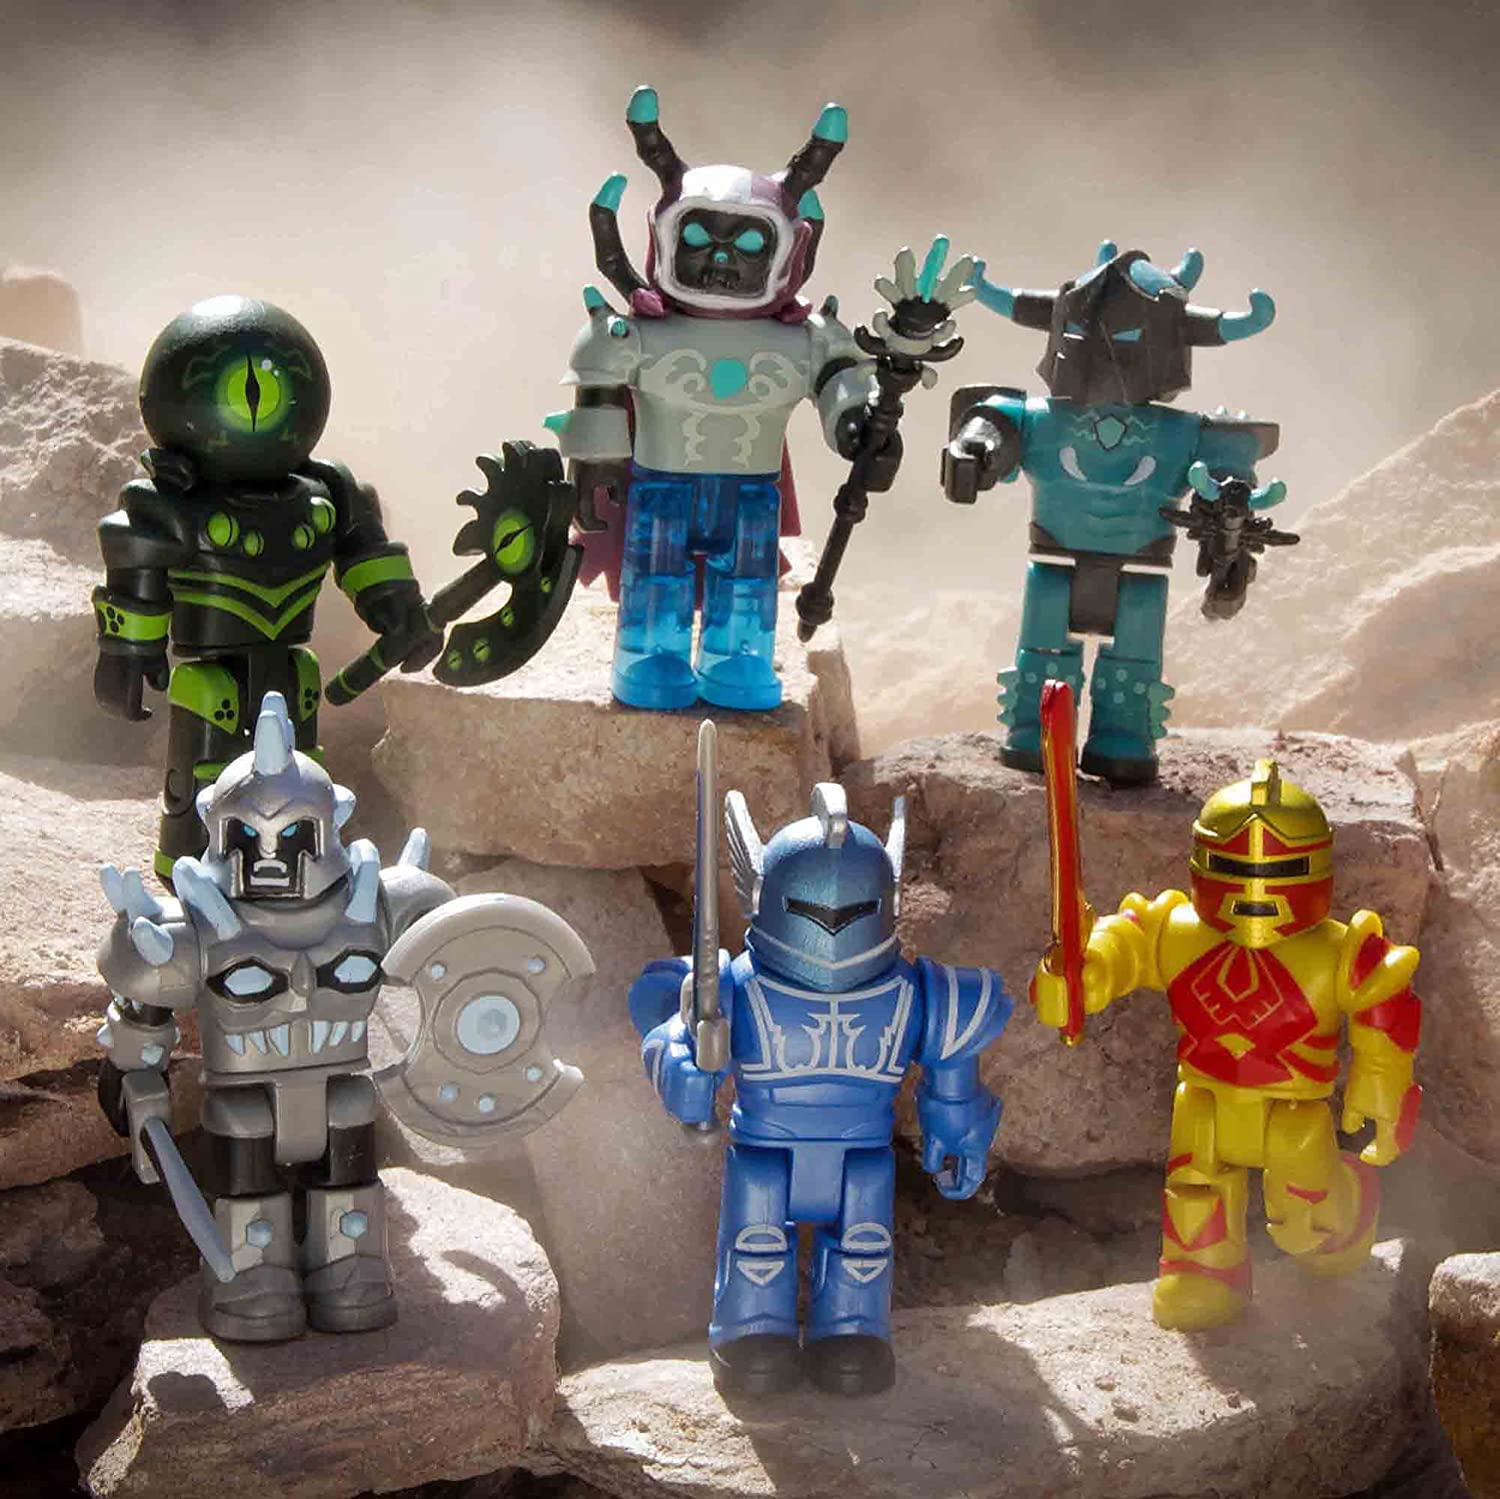 Roblox Action Collection - Champions of Roblox Six Figure Pack [Includes Exclusive Virtual Item]